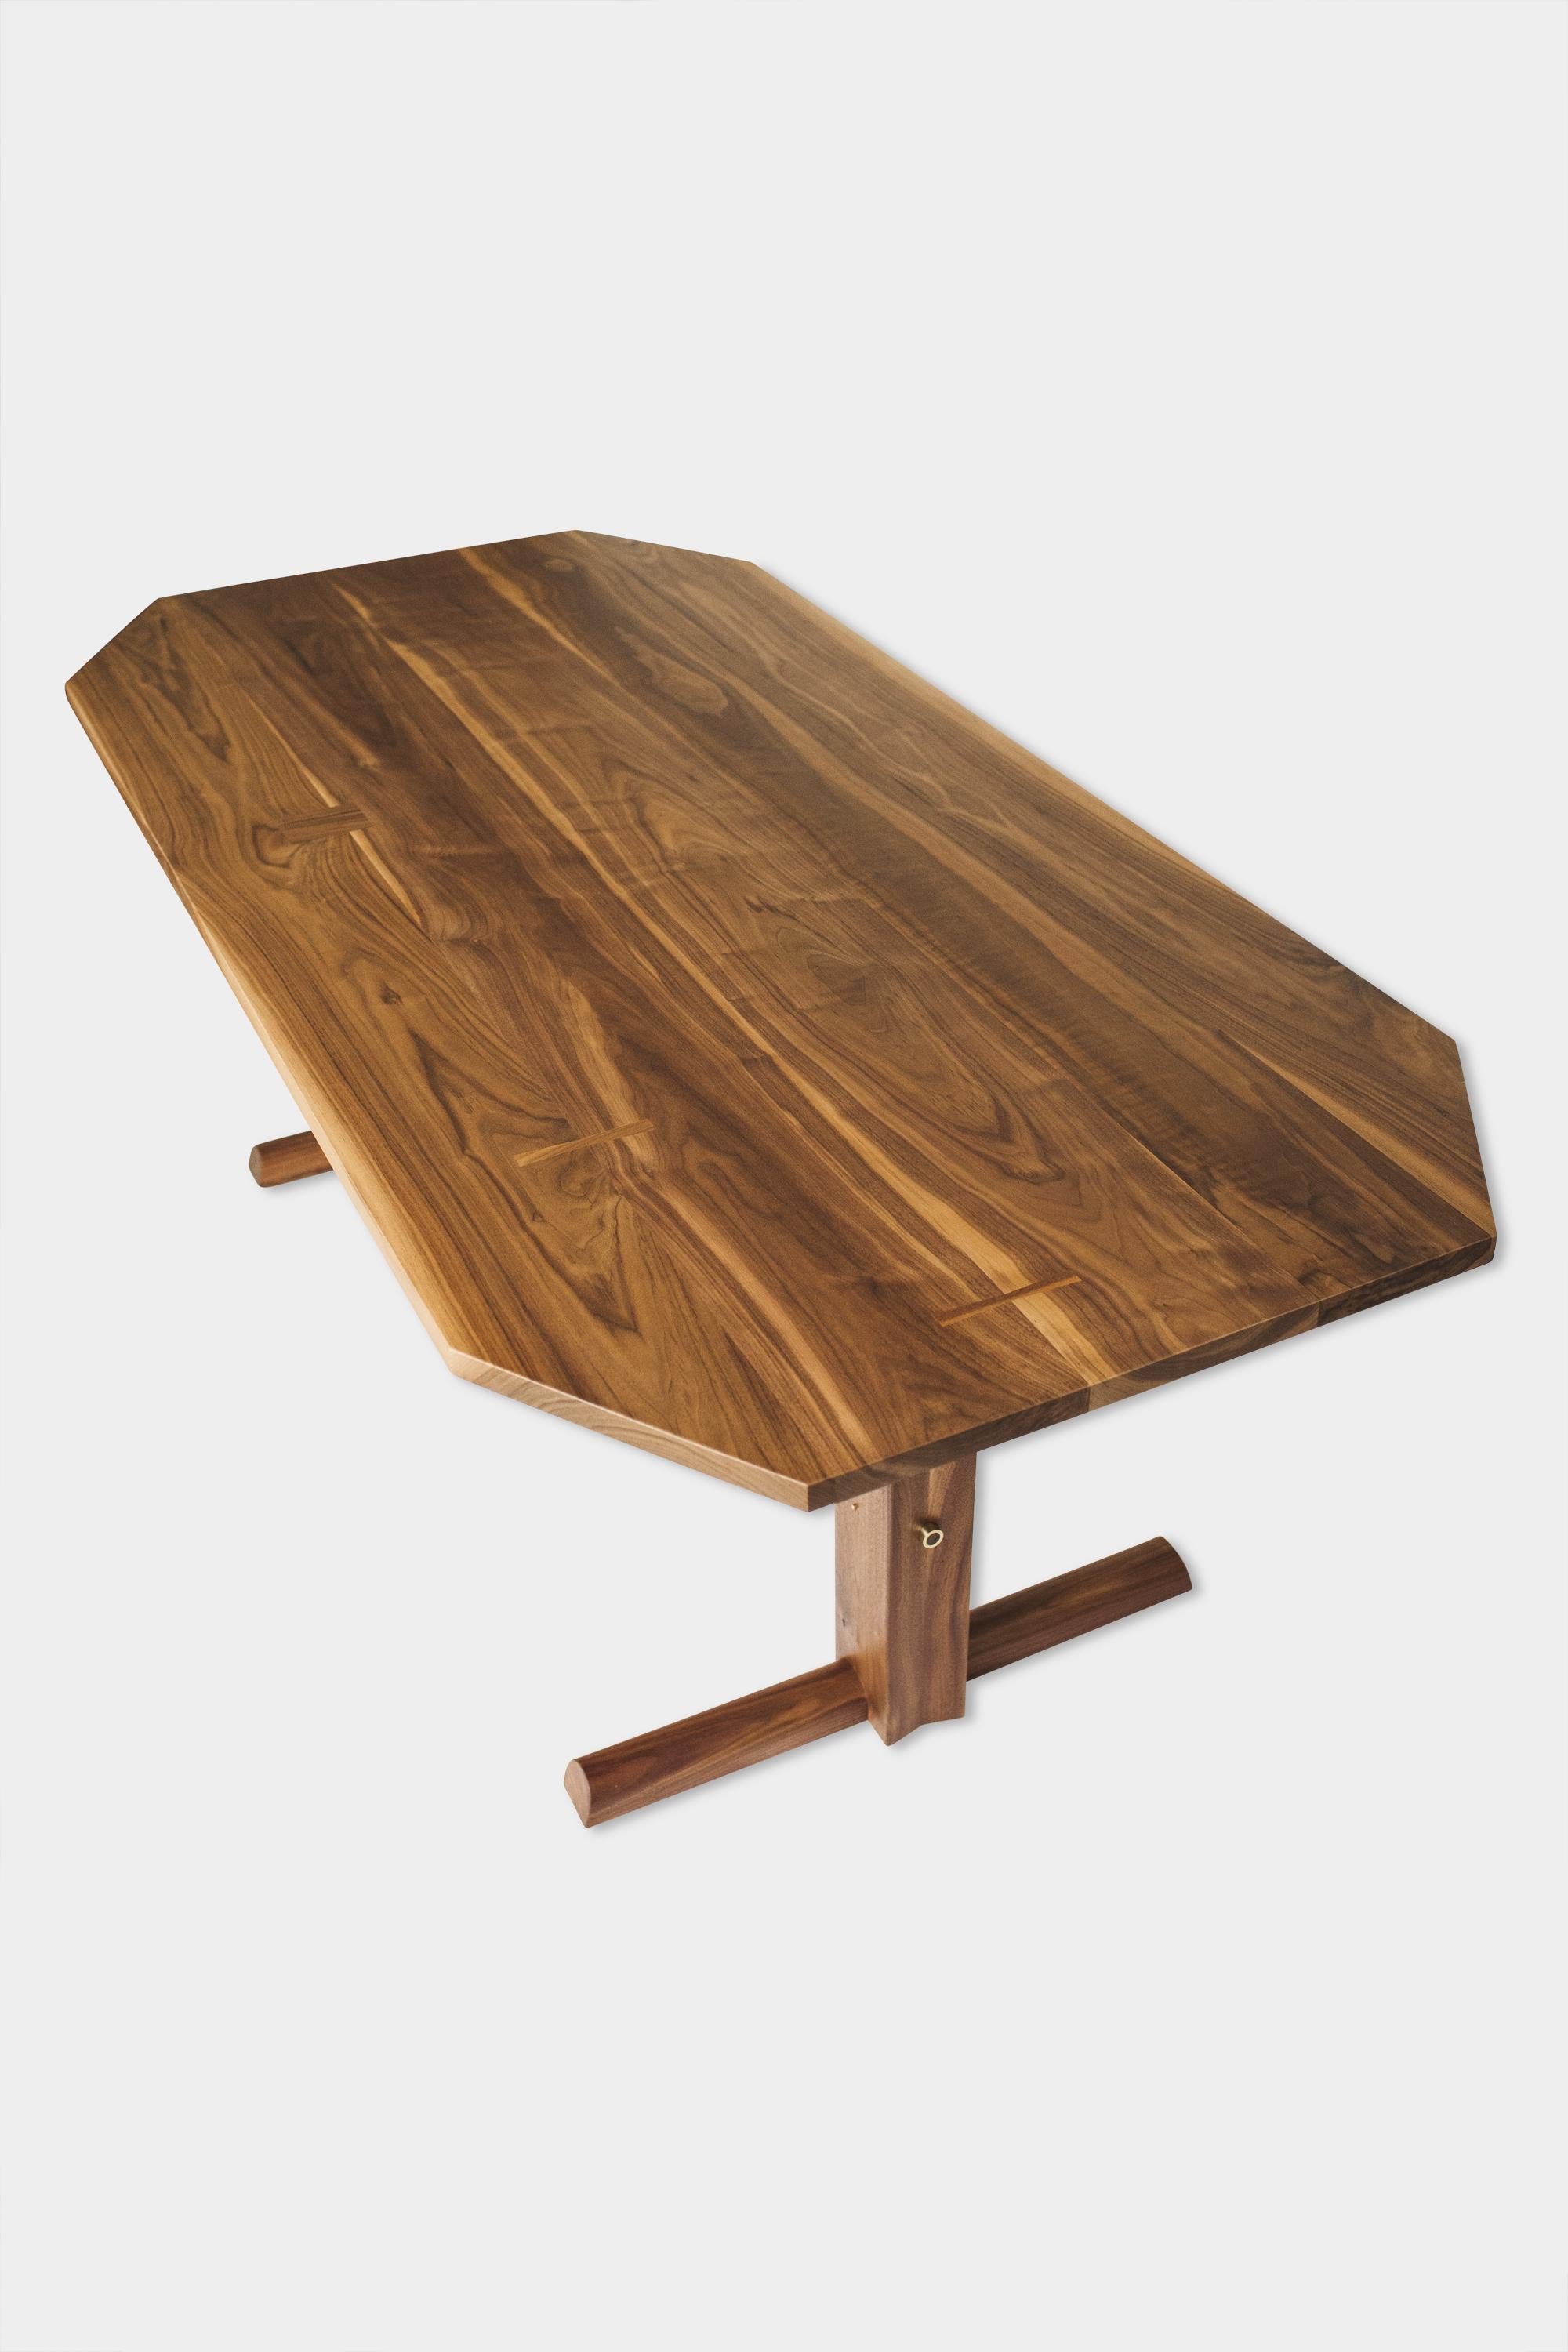 Woodwork Clipped Corner BRIG Dining Table in Walnut For Sale